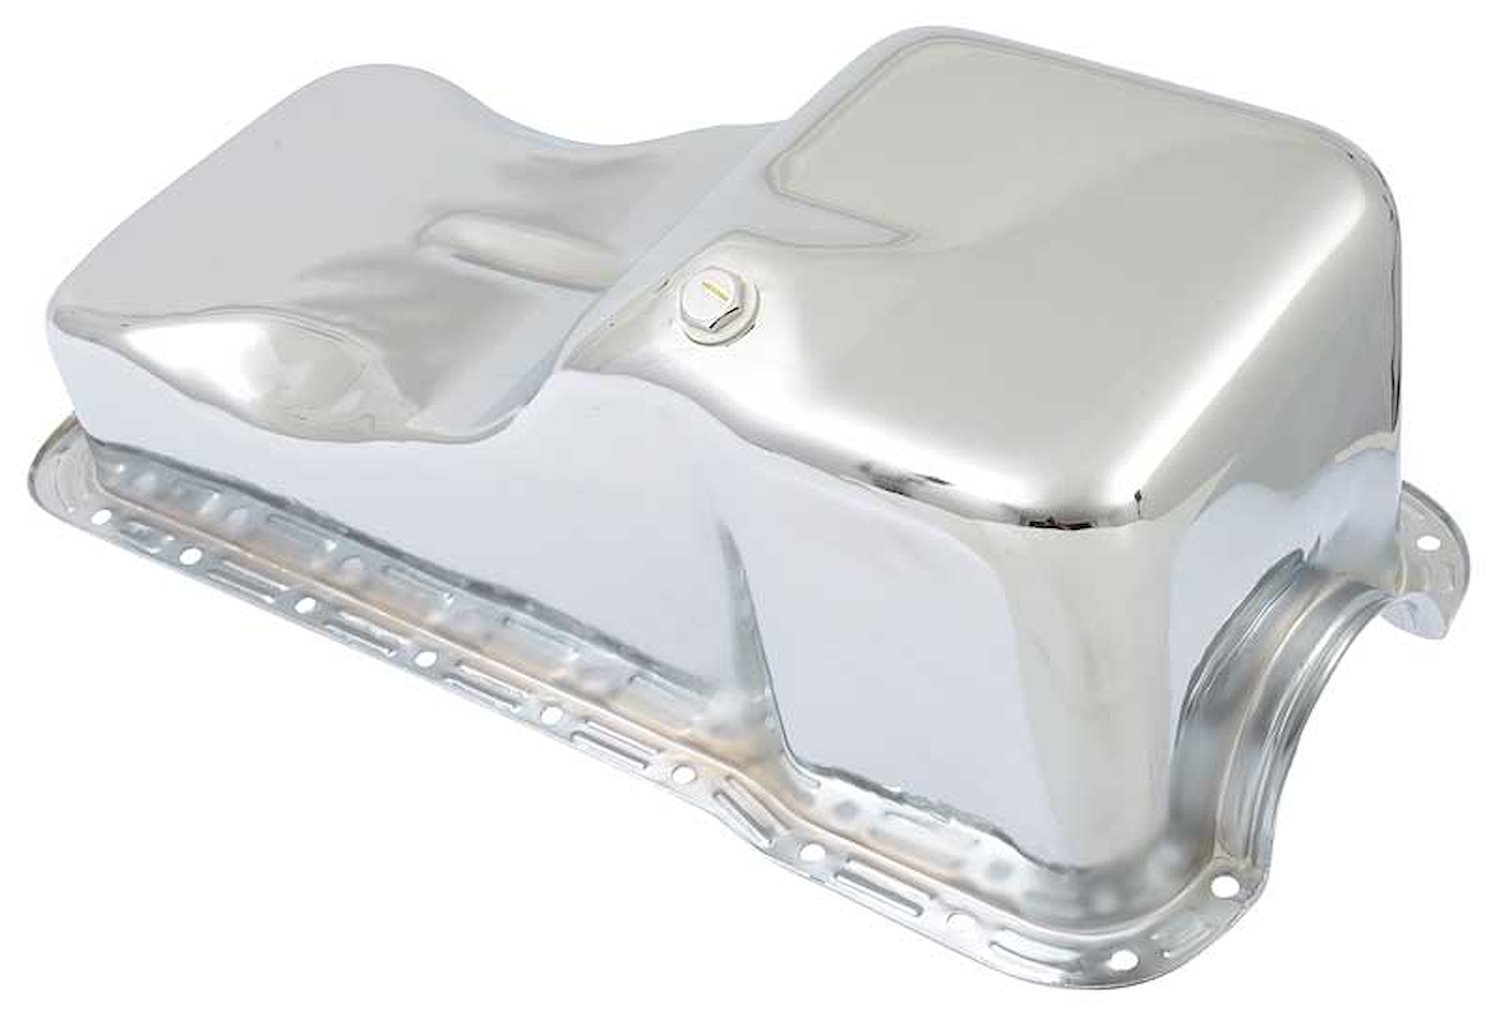 7452 Oil Pan-1969-73 Mustang/Cougar; 351 Windsor; Chrome Plated